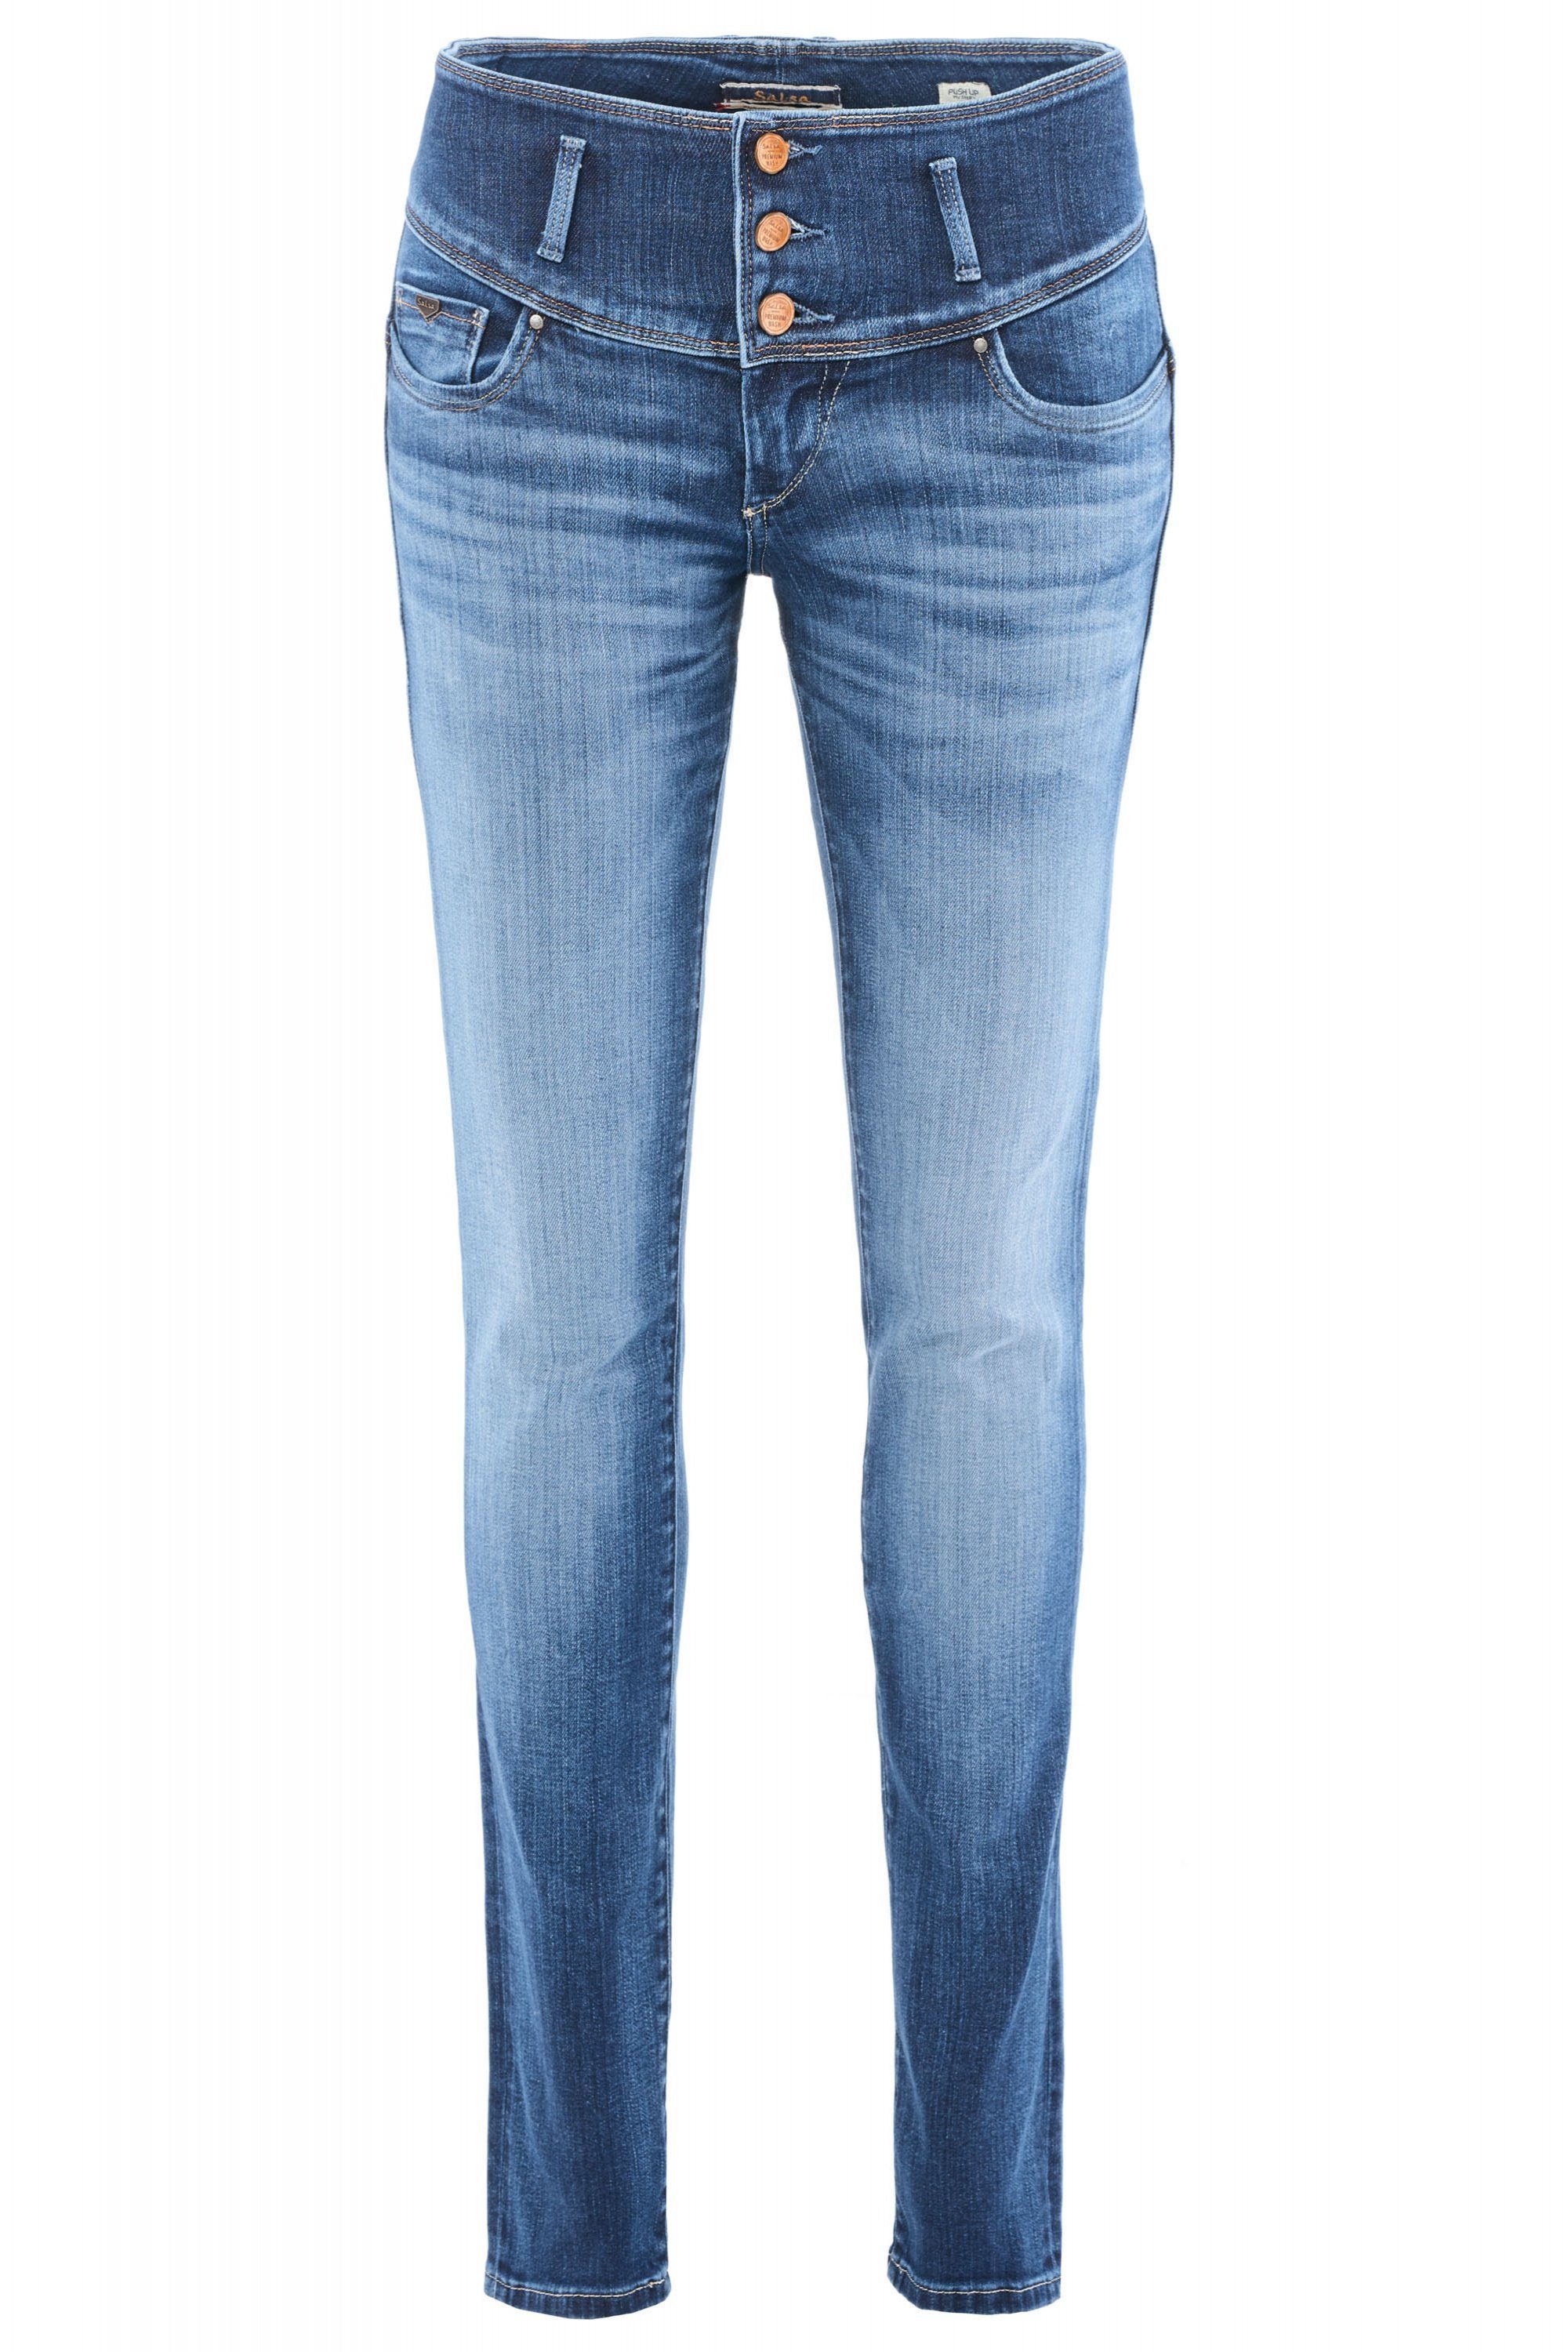 MYSTERY mid JEANS UP waschung Salsa 119088.8503 blue premium Stretch-Jeans SALSA used PUSH